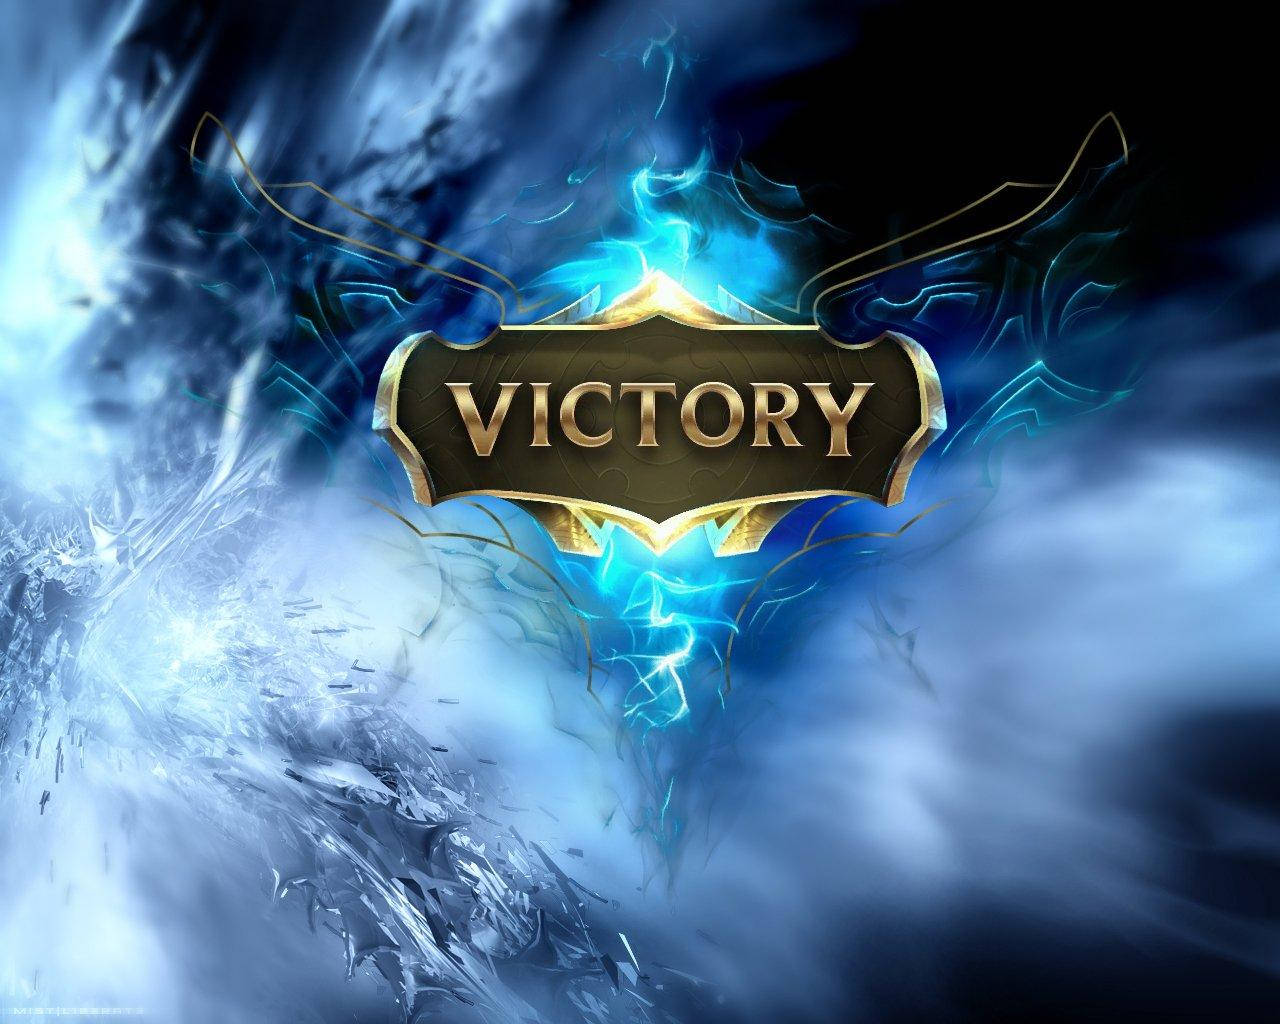 Victory Frozen Blue Aesthetic Background